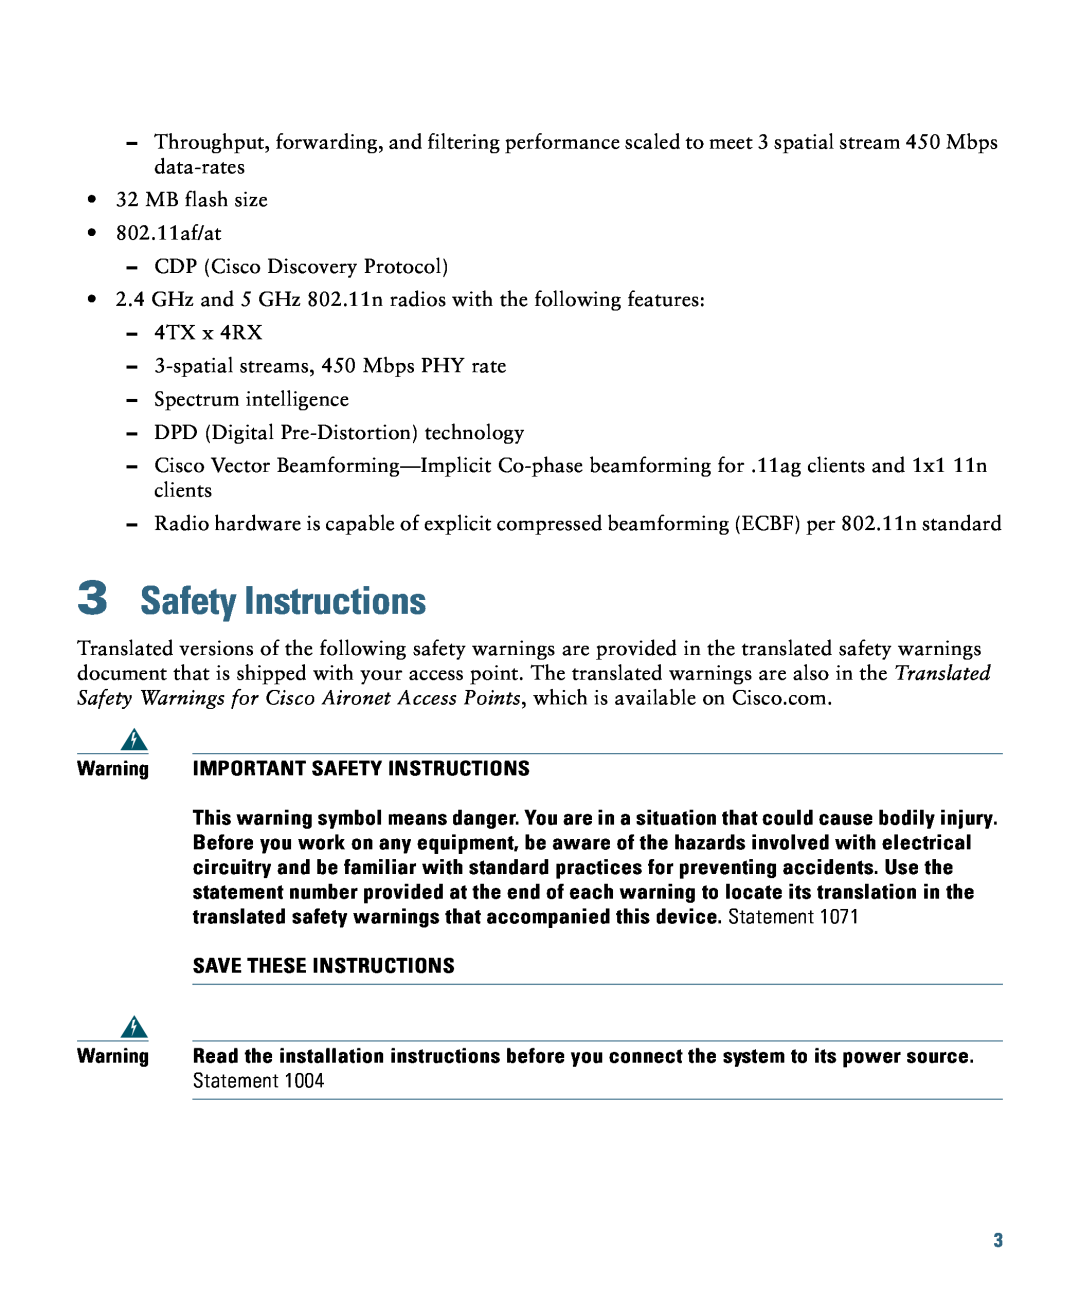 Cisco Systems AIRCAP3602ISK9, AIRCAP3602ITK9 Important Safety Instructions, Save These Instructions, Statement 